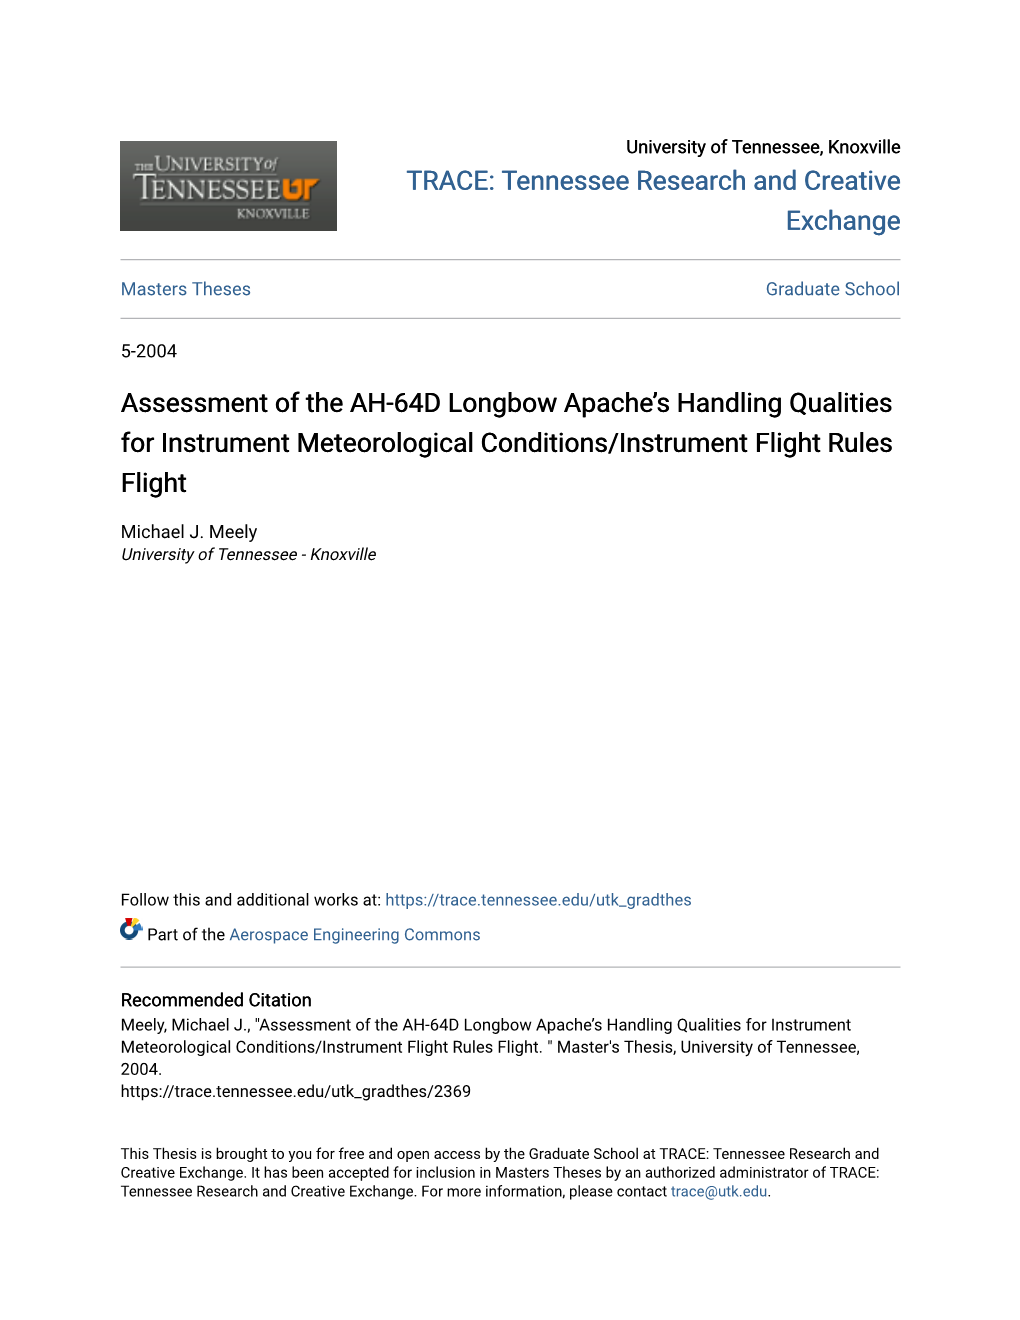 Assessment of the AH-64D Longbow Apache's Handling Qualities for Instrument Meteorological Conditions/Instrument Flight Rules